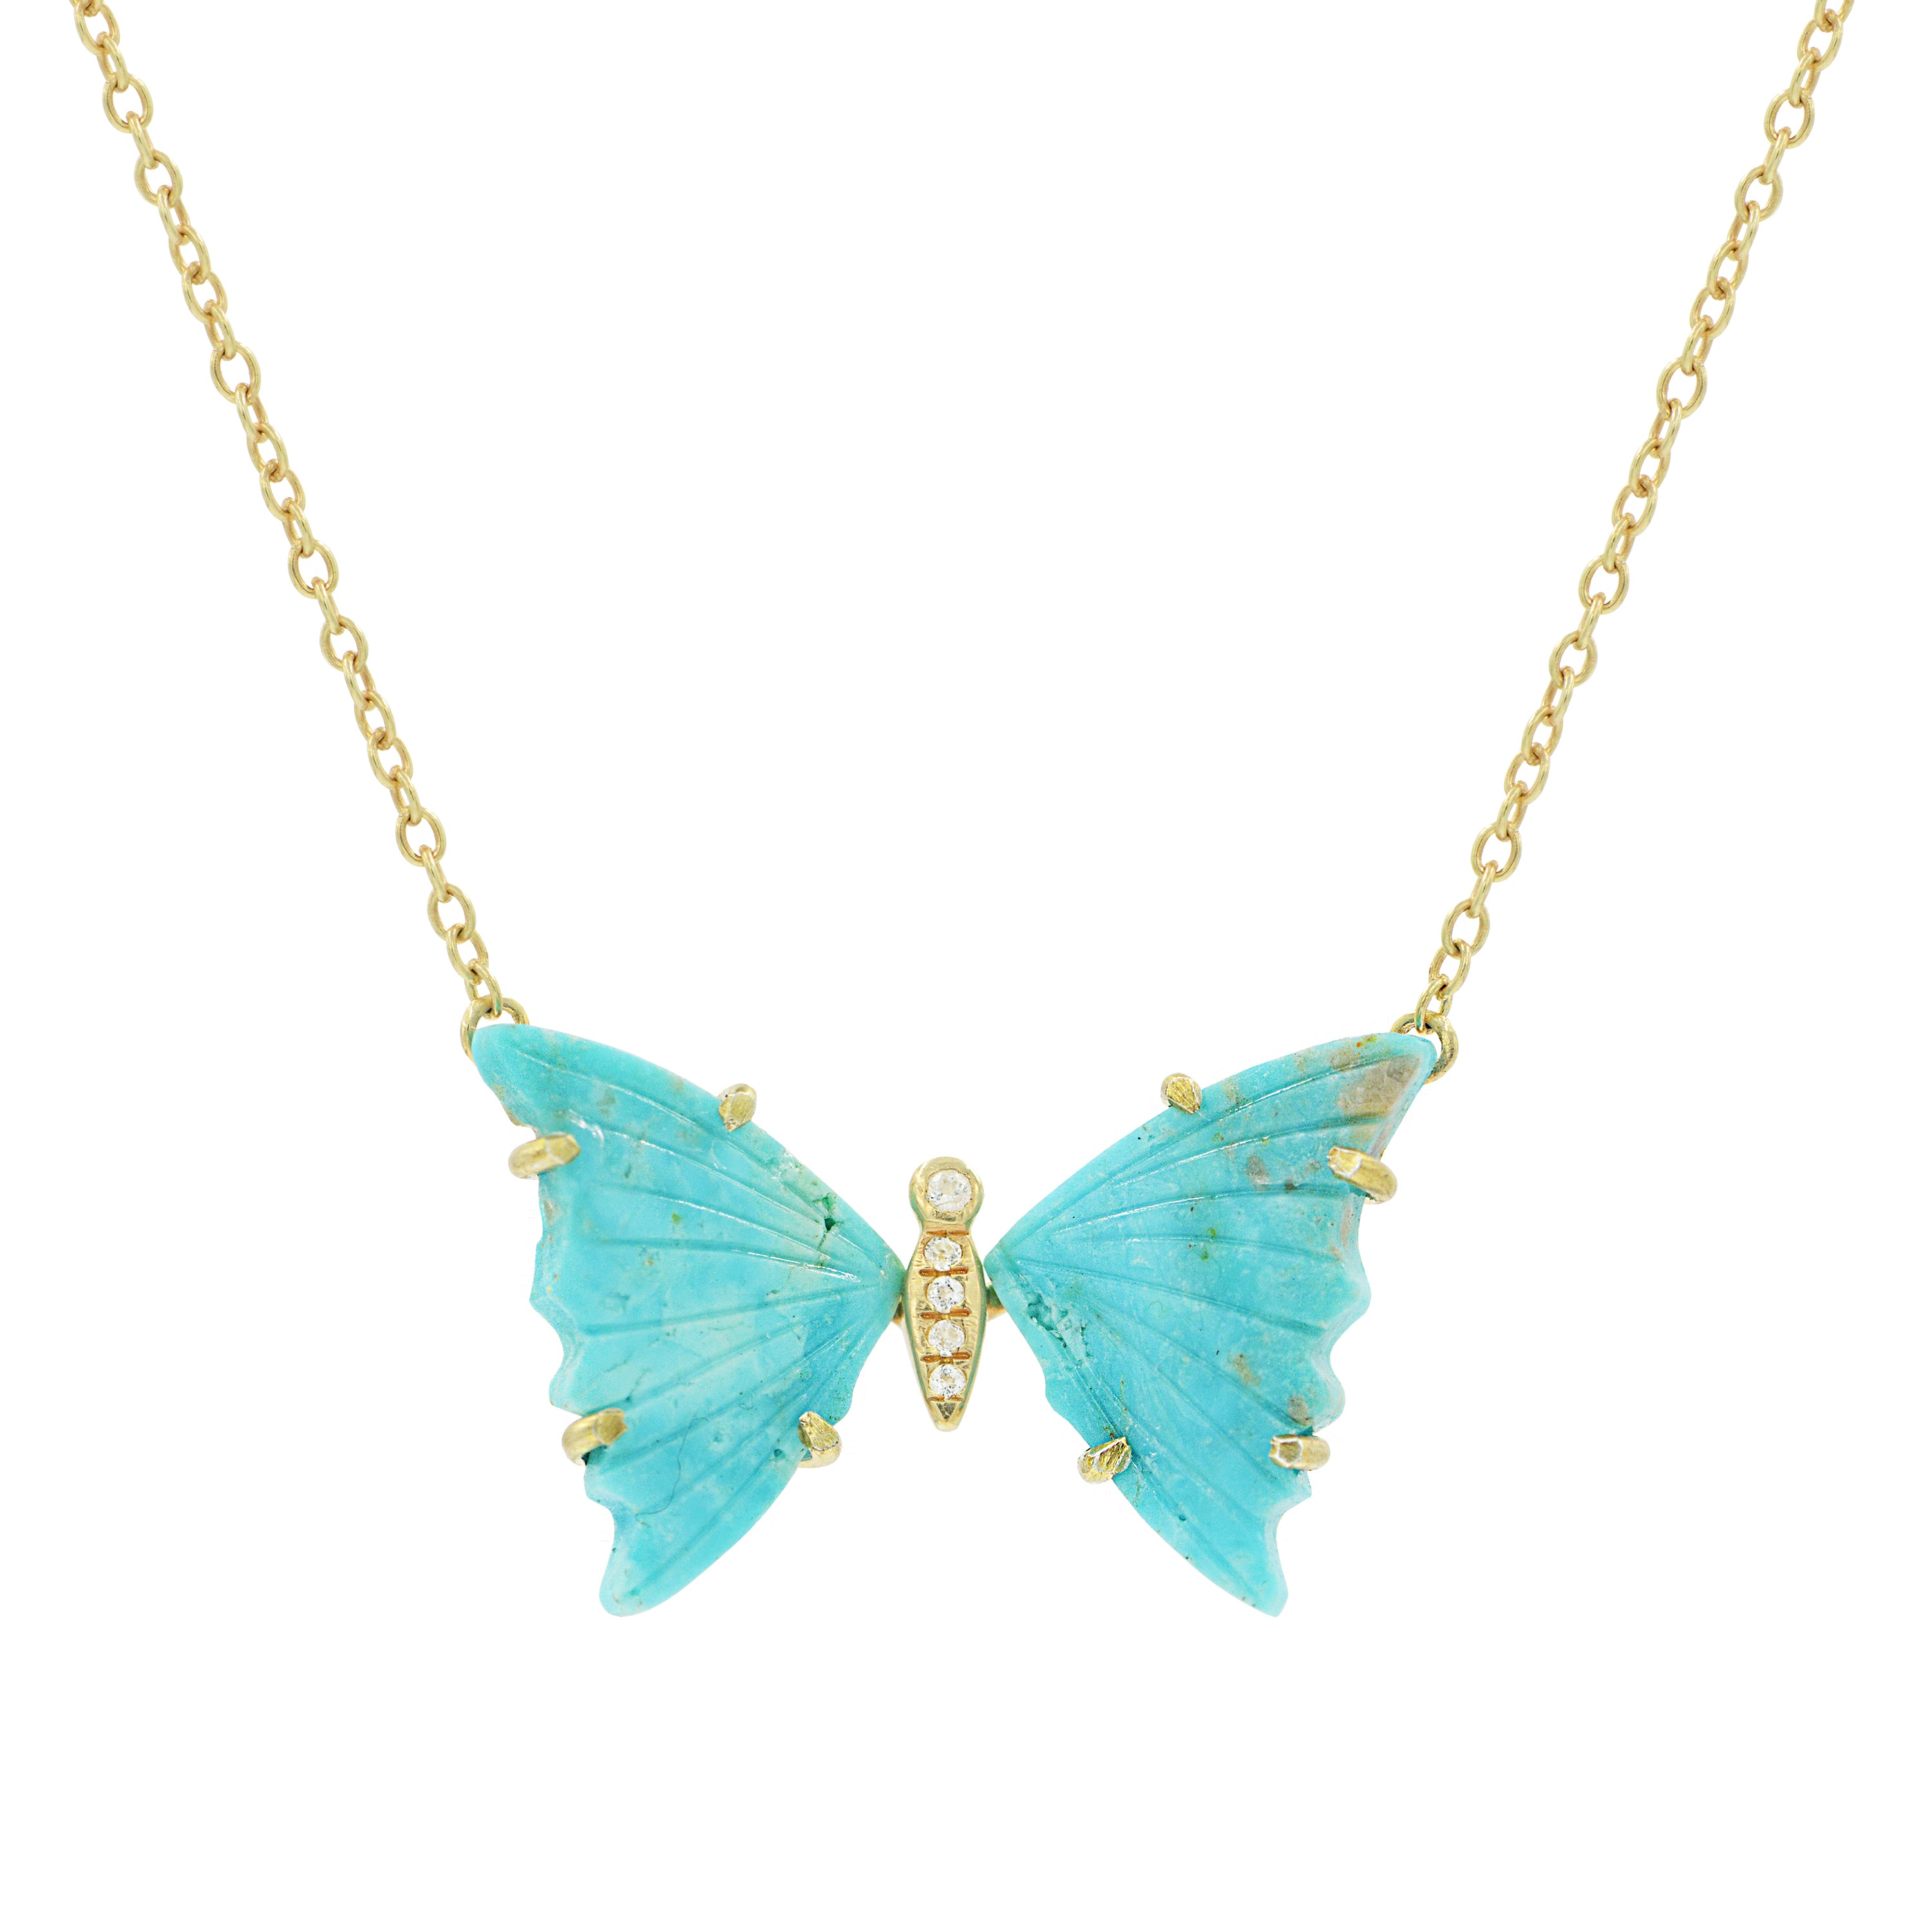 Turquoise Butterfly Necklace With White Topaz - KAMARIA